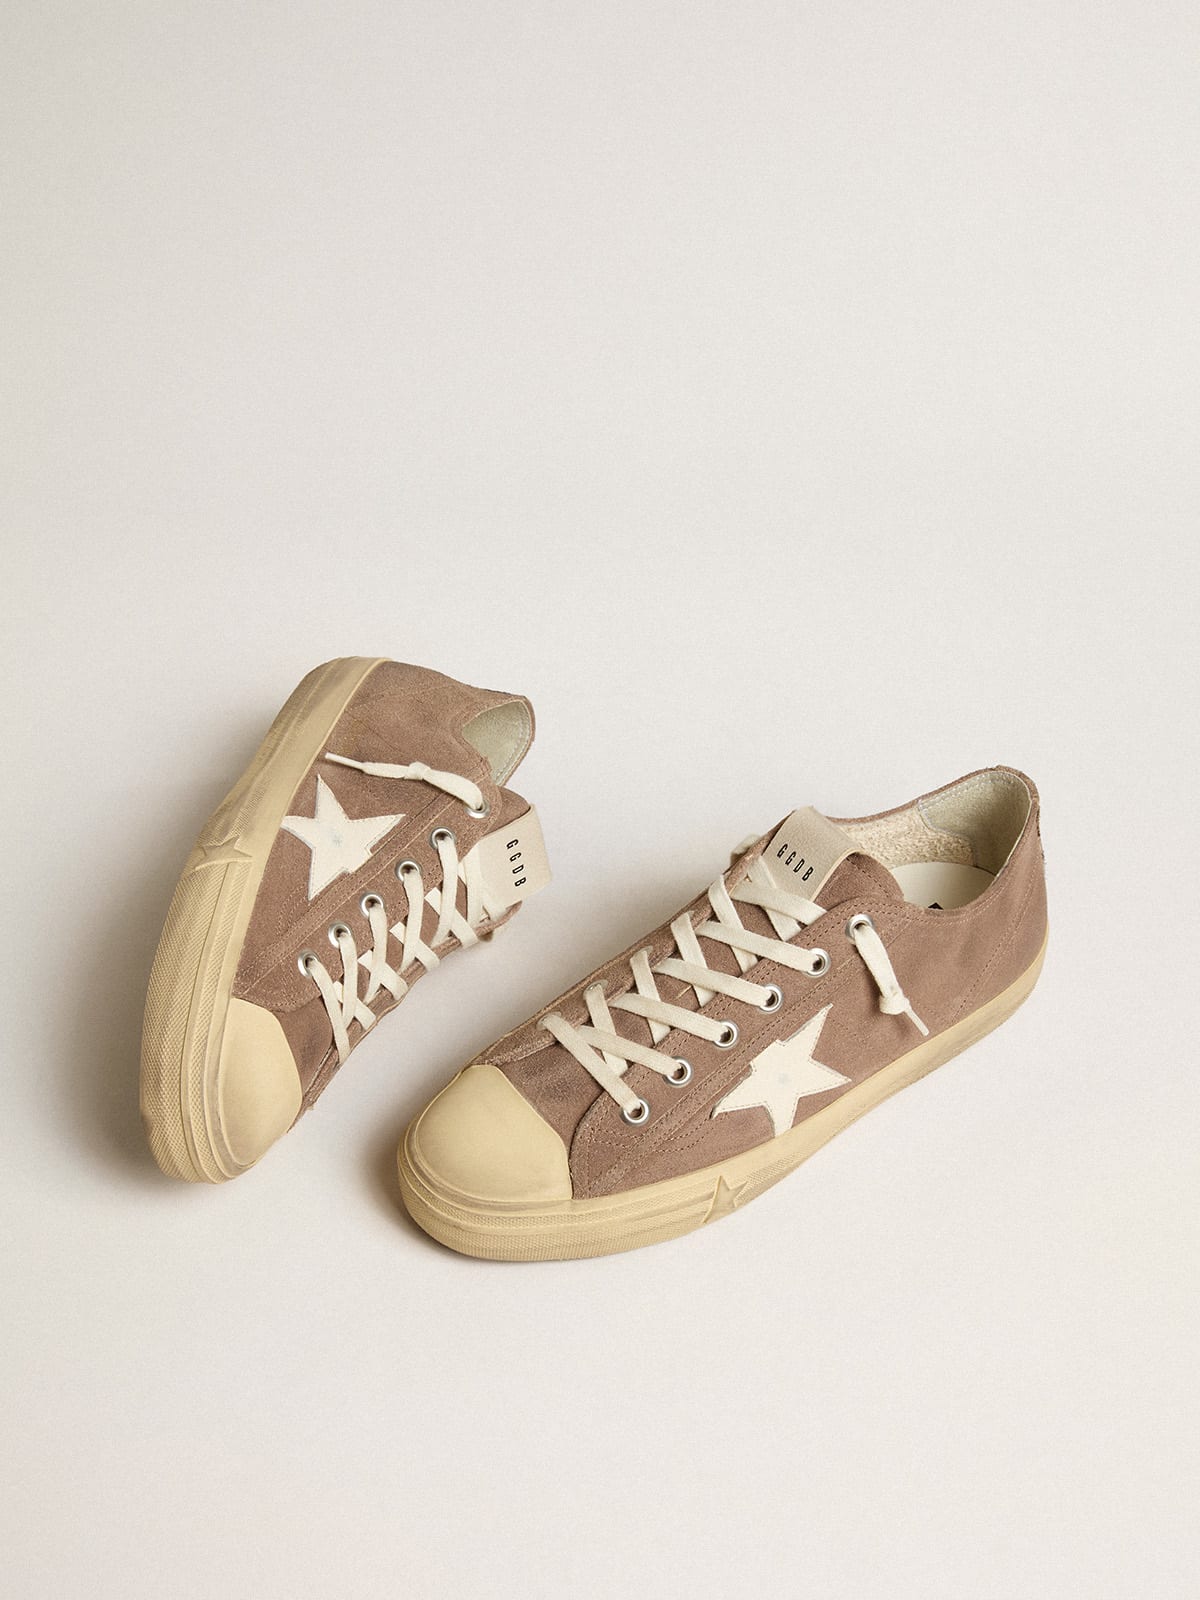 Golden Goose - V-Star in dove-gray suede with white nappa leather star in 